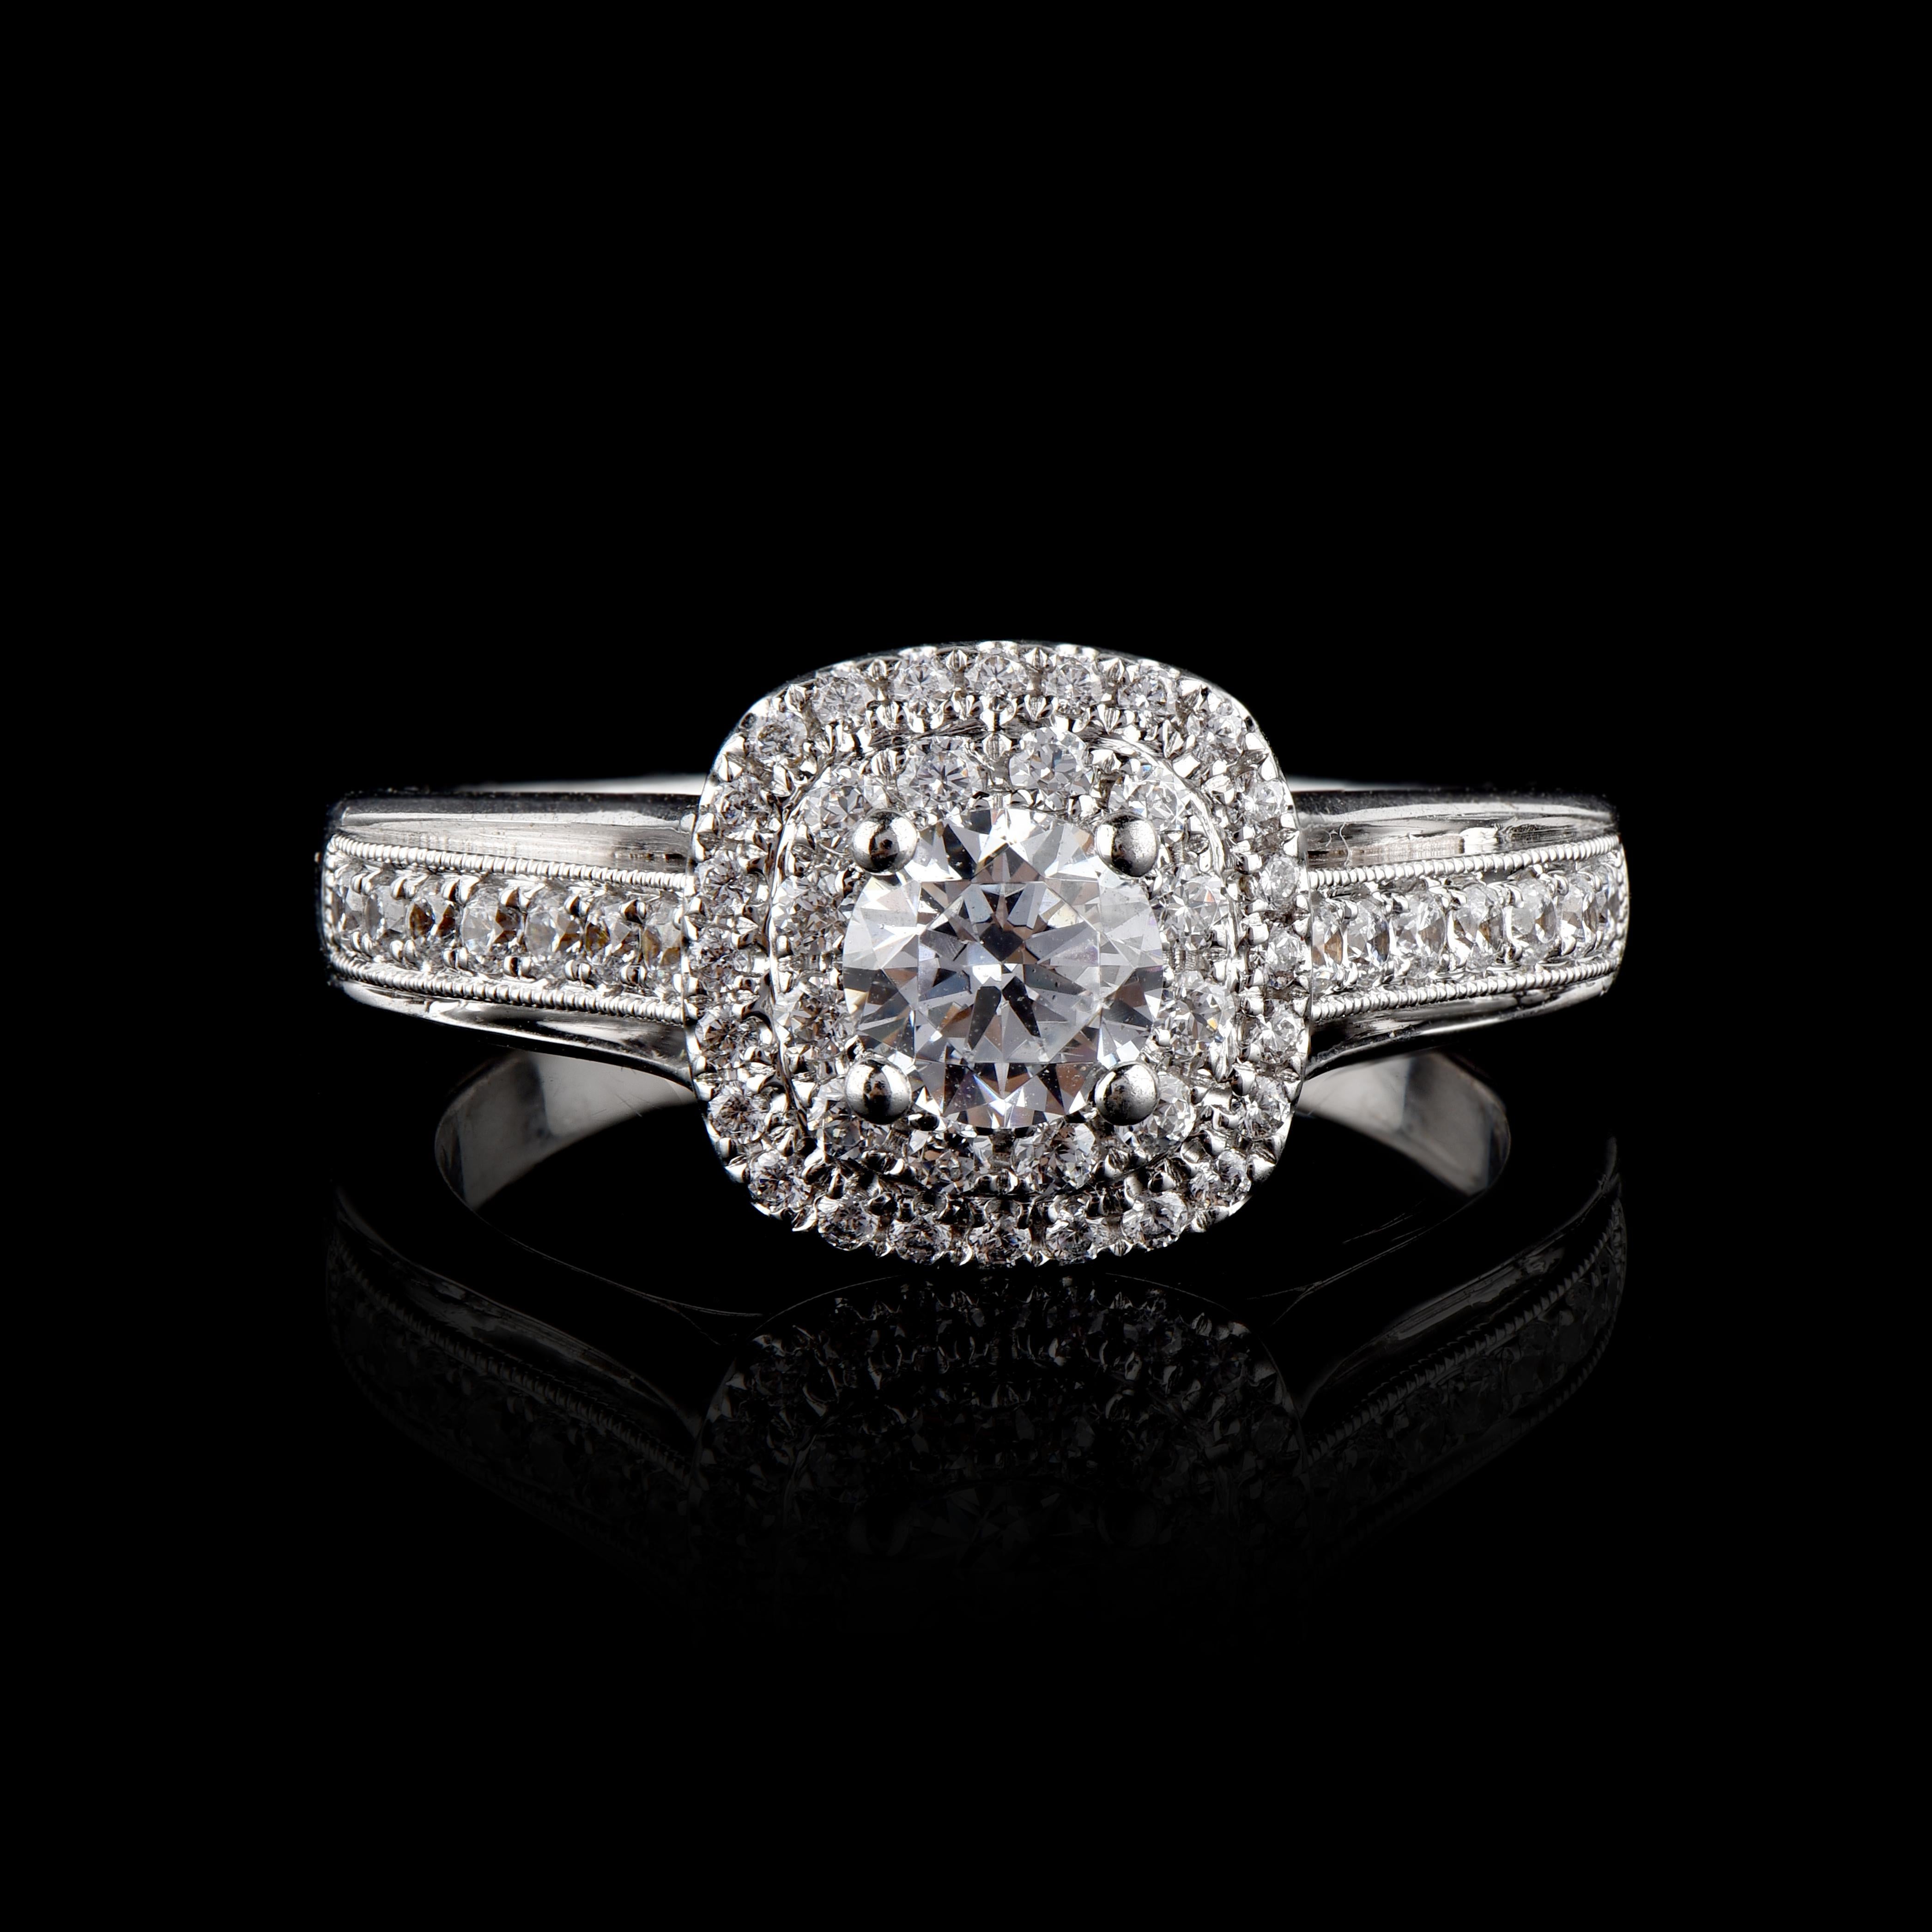 This Halo Engagement Ring is expertly crafted in 18 Karat White Gold and features 0.50 ct centre stone and 0.50 ct of double diamond frame and lined shank in stackable prong and prong setting. The diamonds are natural, not treated and dazzles in G-H